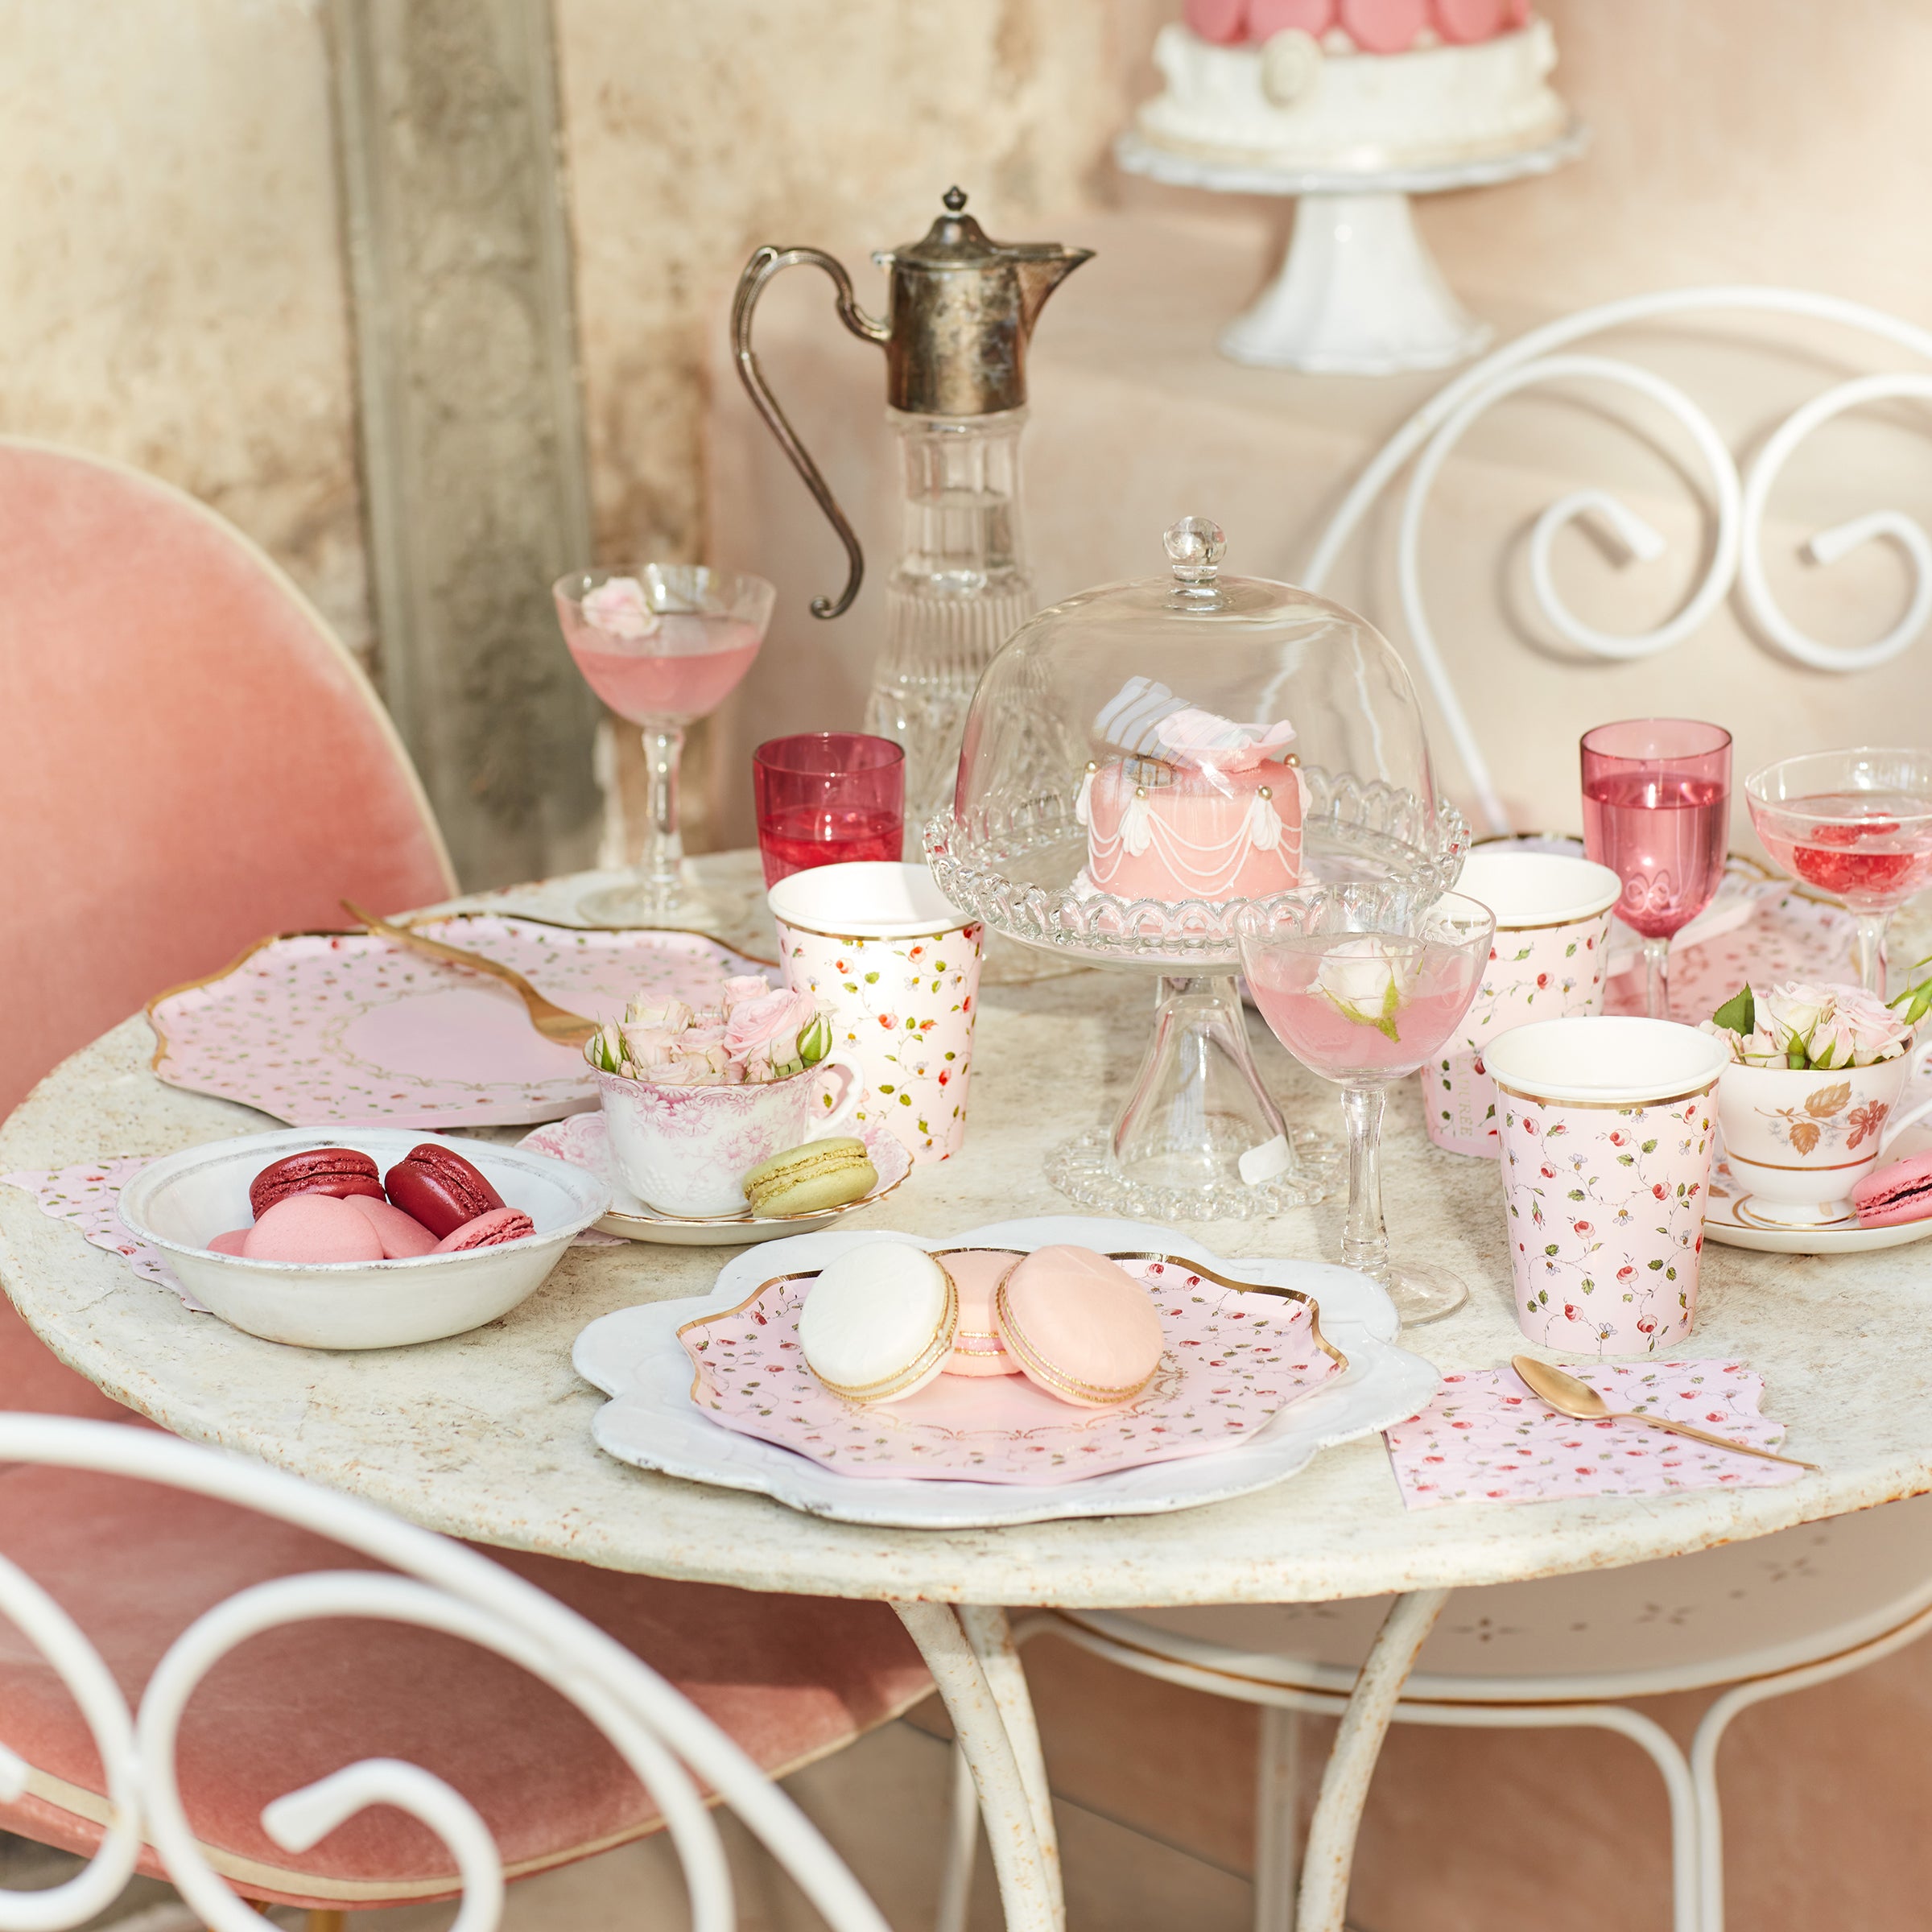 Our party plates, small plates in soft pink and red, are perfect for a romantic dinner.